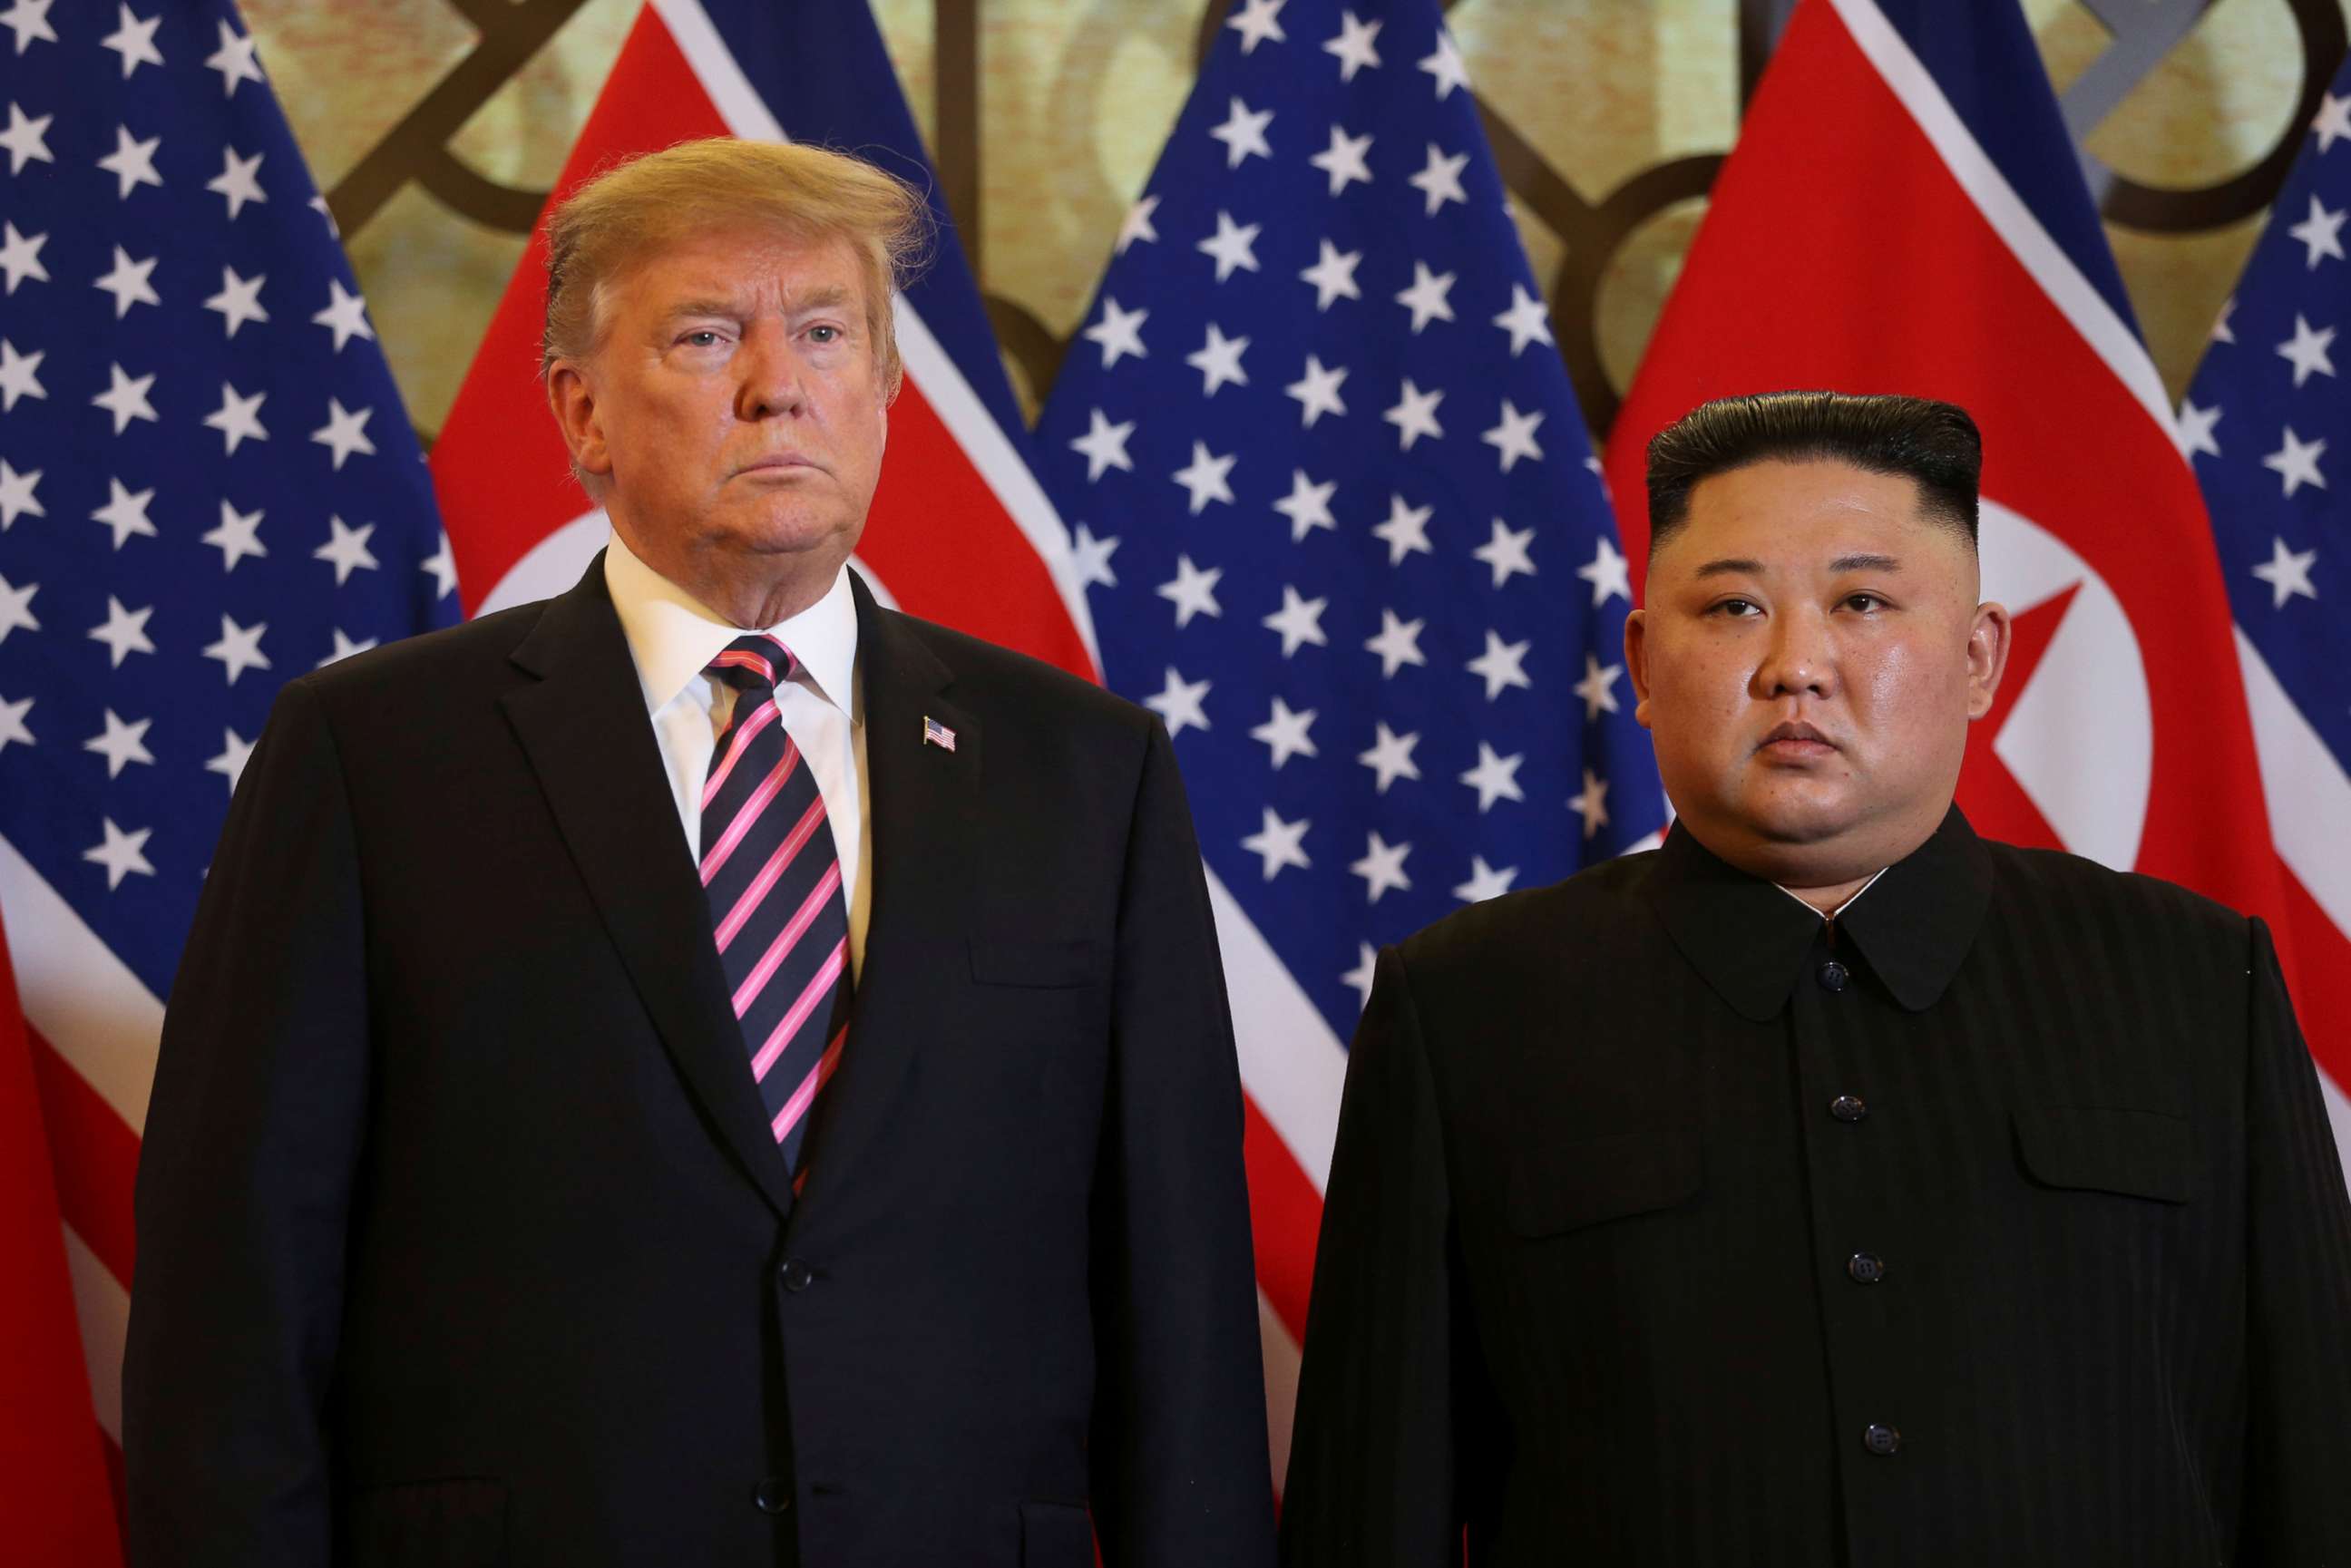 PHOTO: President Donald Trump and North Korean leader Kim Jong Un pose before their meeting during the second U.S.-North Korea summit at the Metropole Hotel in Hanoi, Vietnam Feb. 27, 2019.